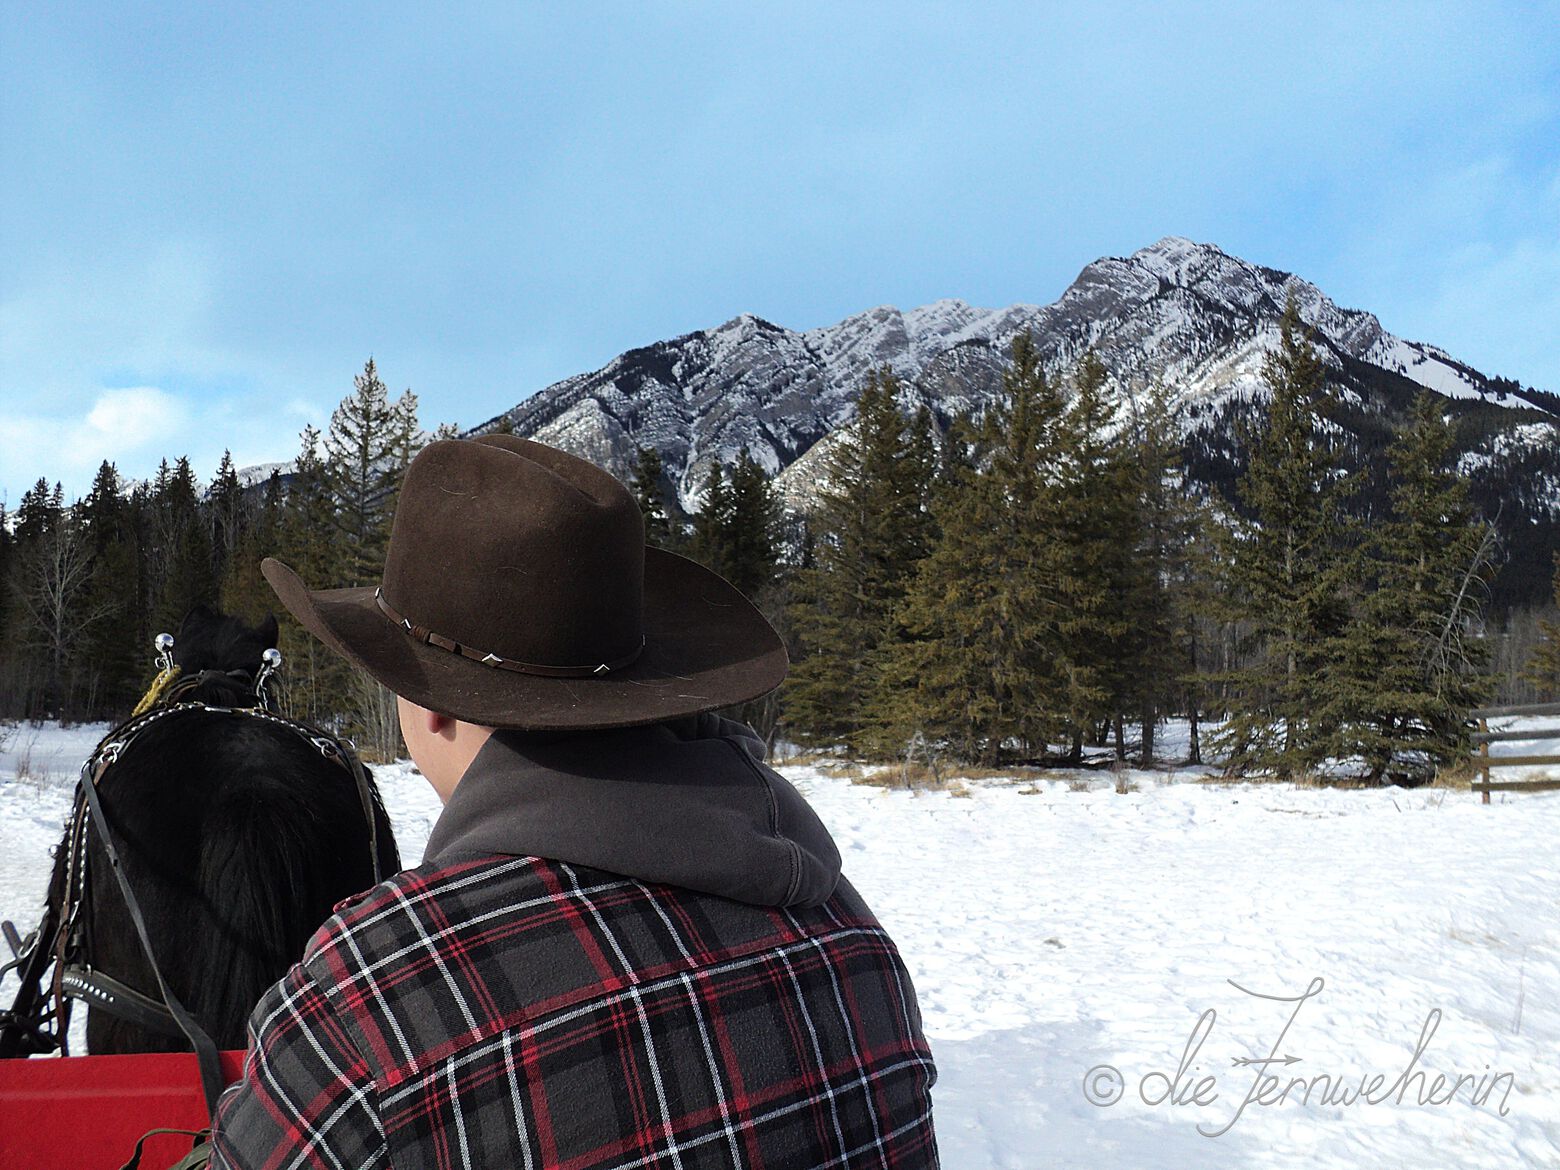 A romantic private sleigh ride during winter in the town of Banff.